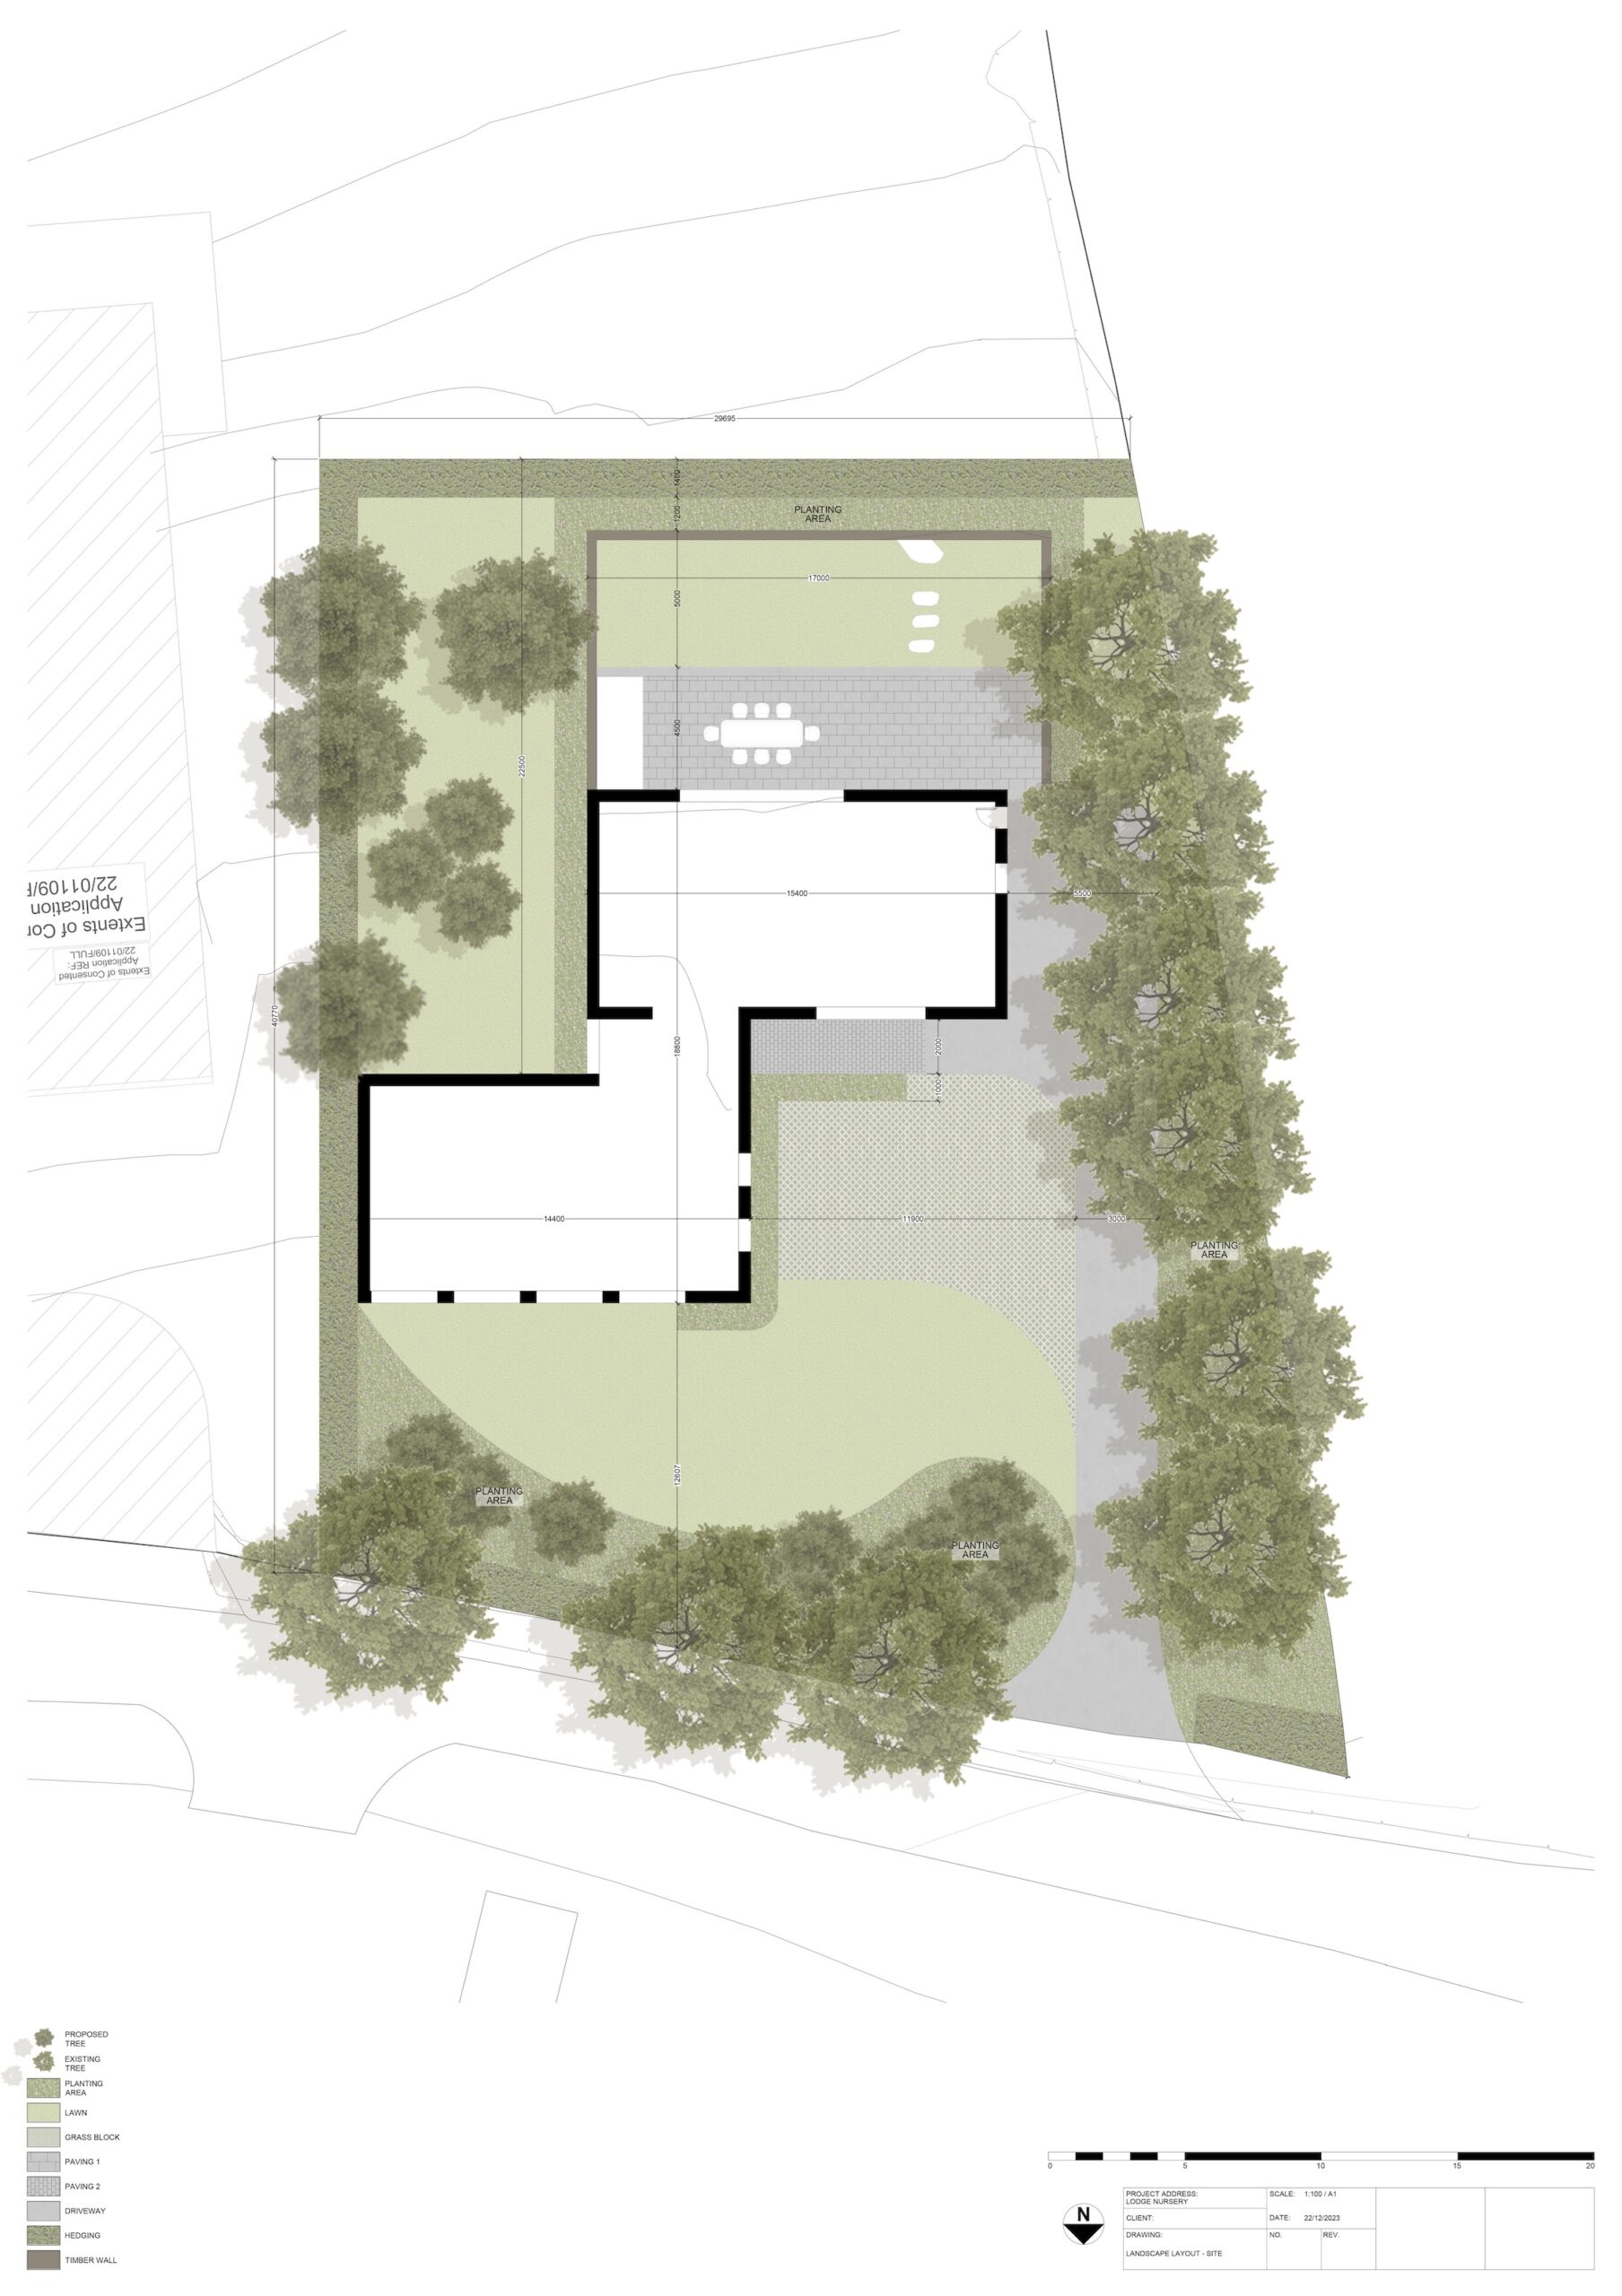 Site plan with measurements of self build plot in Goudhurst, Kent